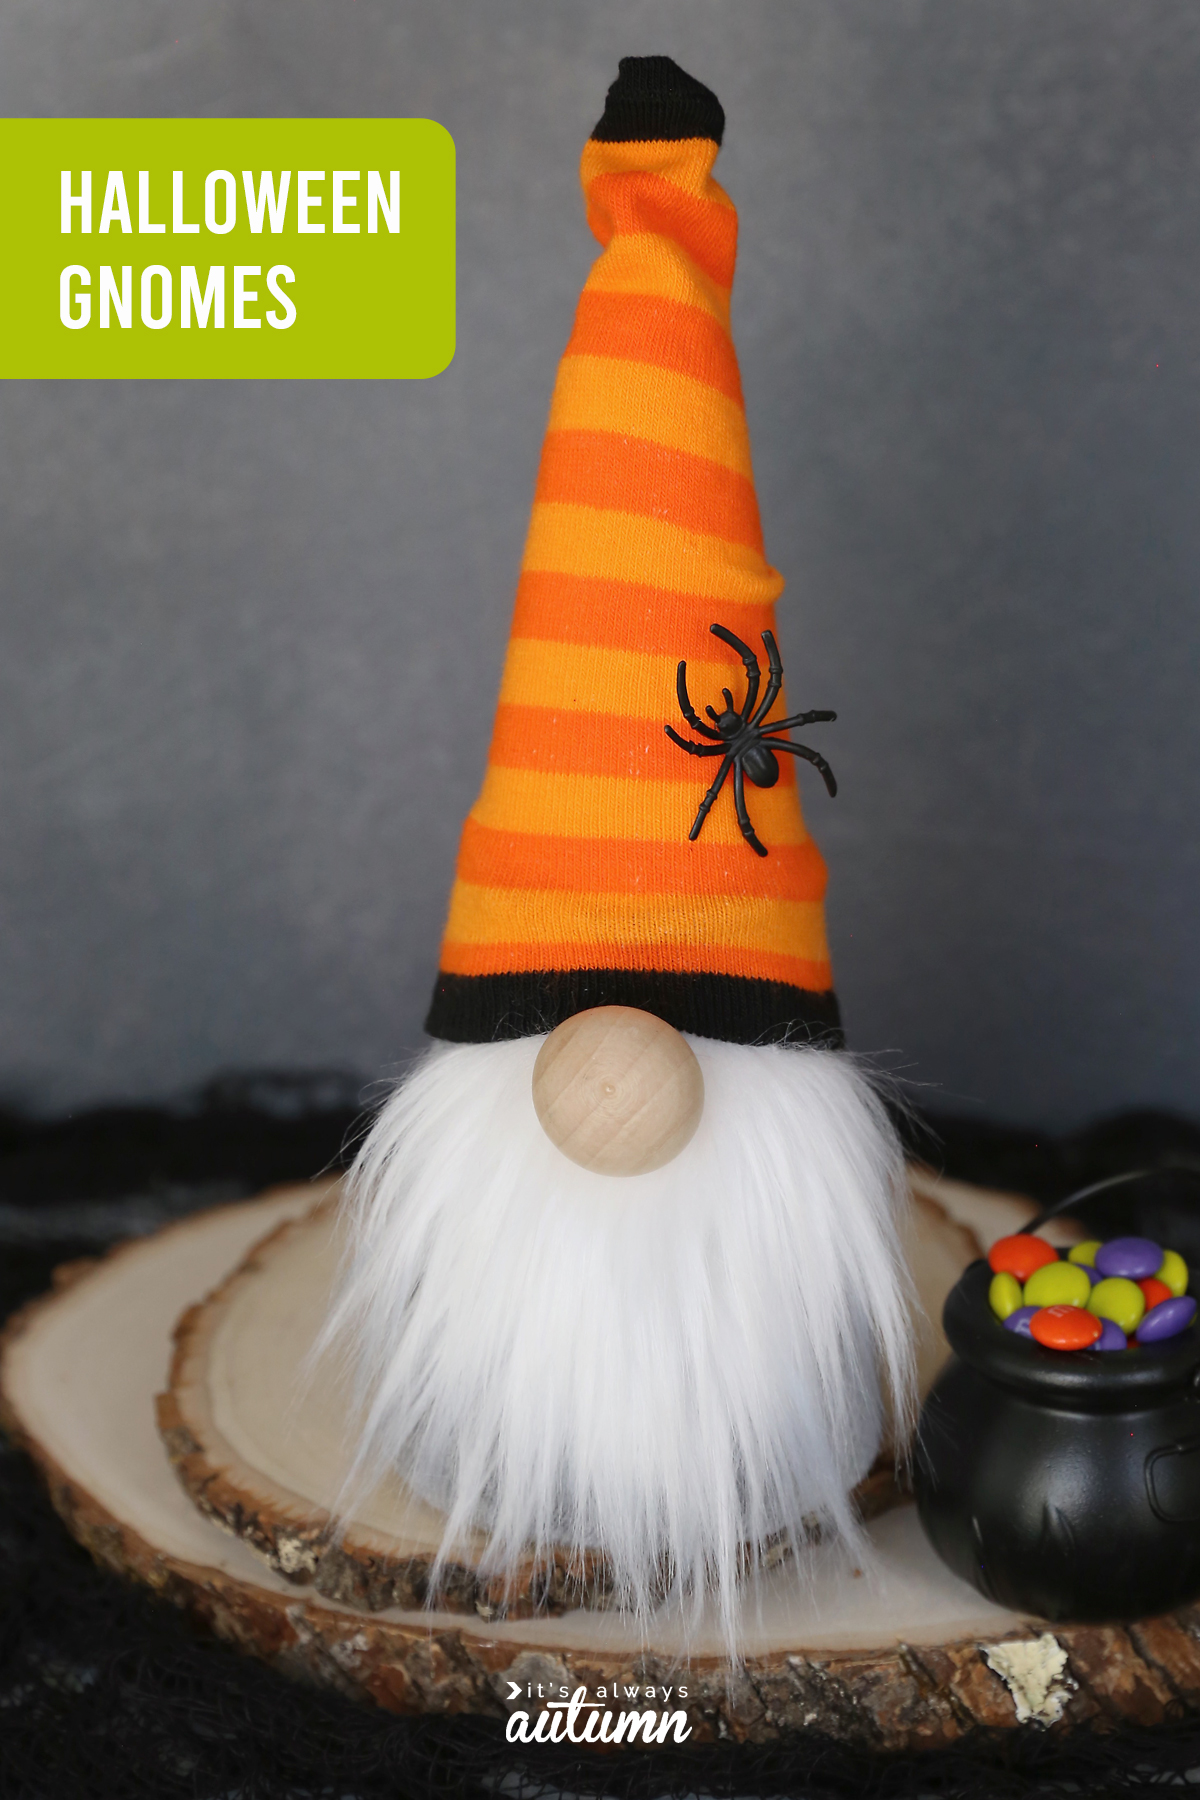 Halloween gnome with an orange striped hat and spider